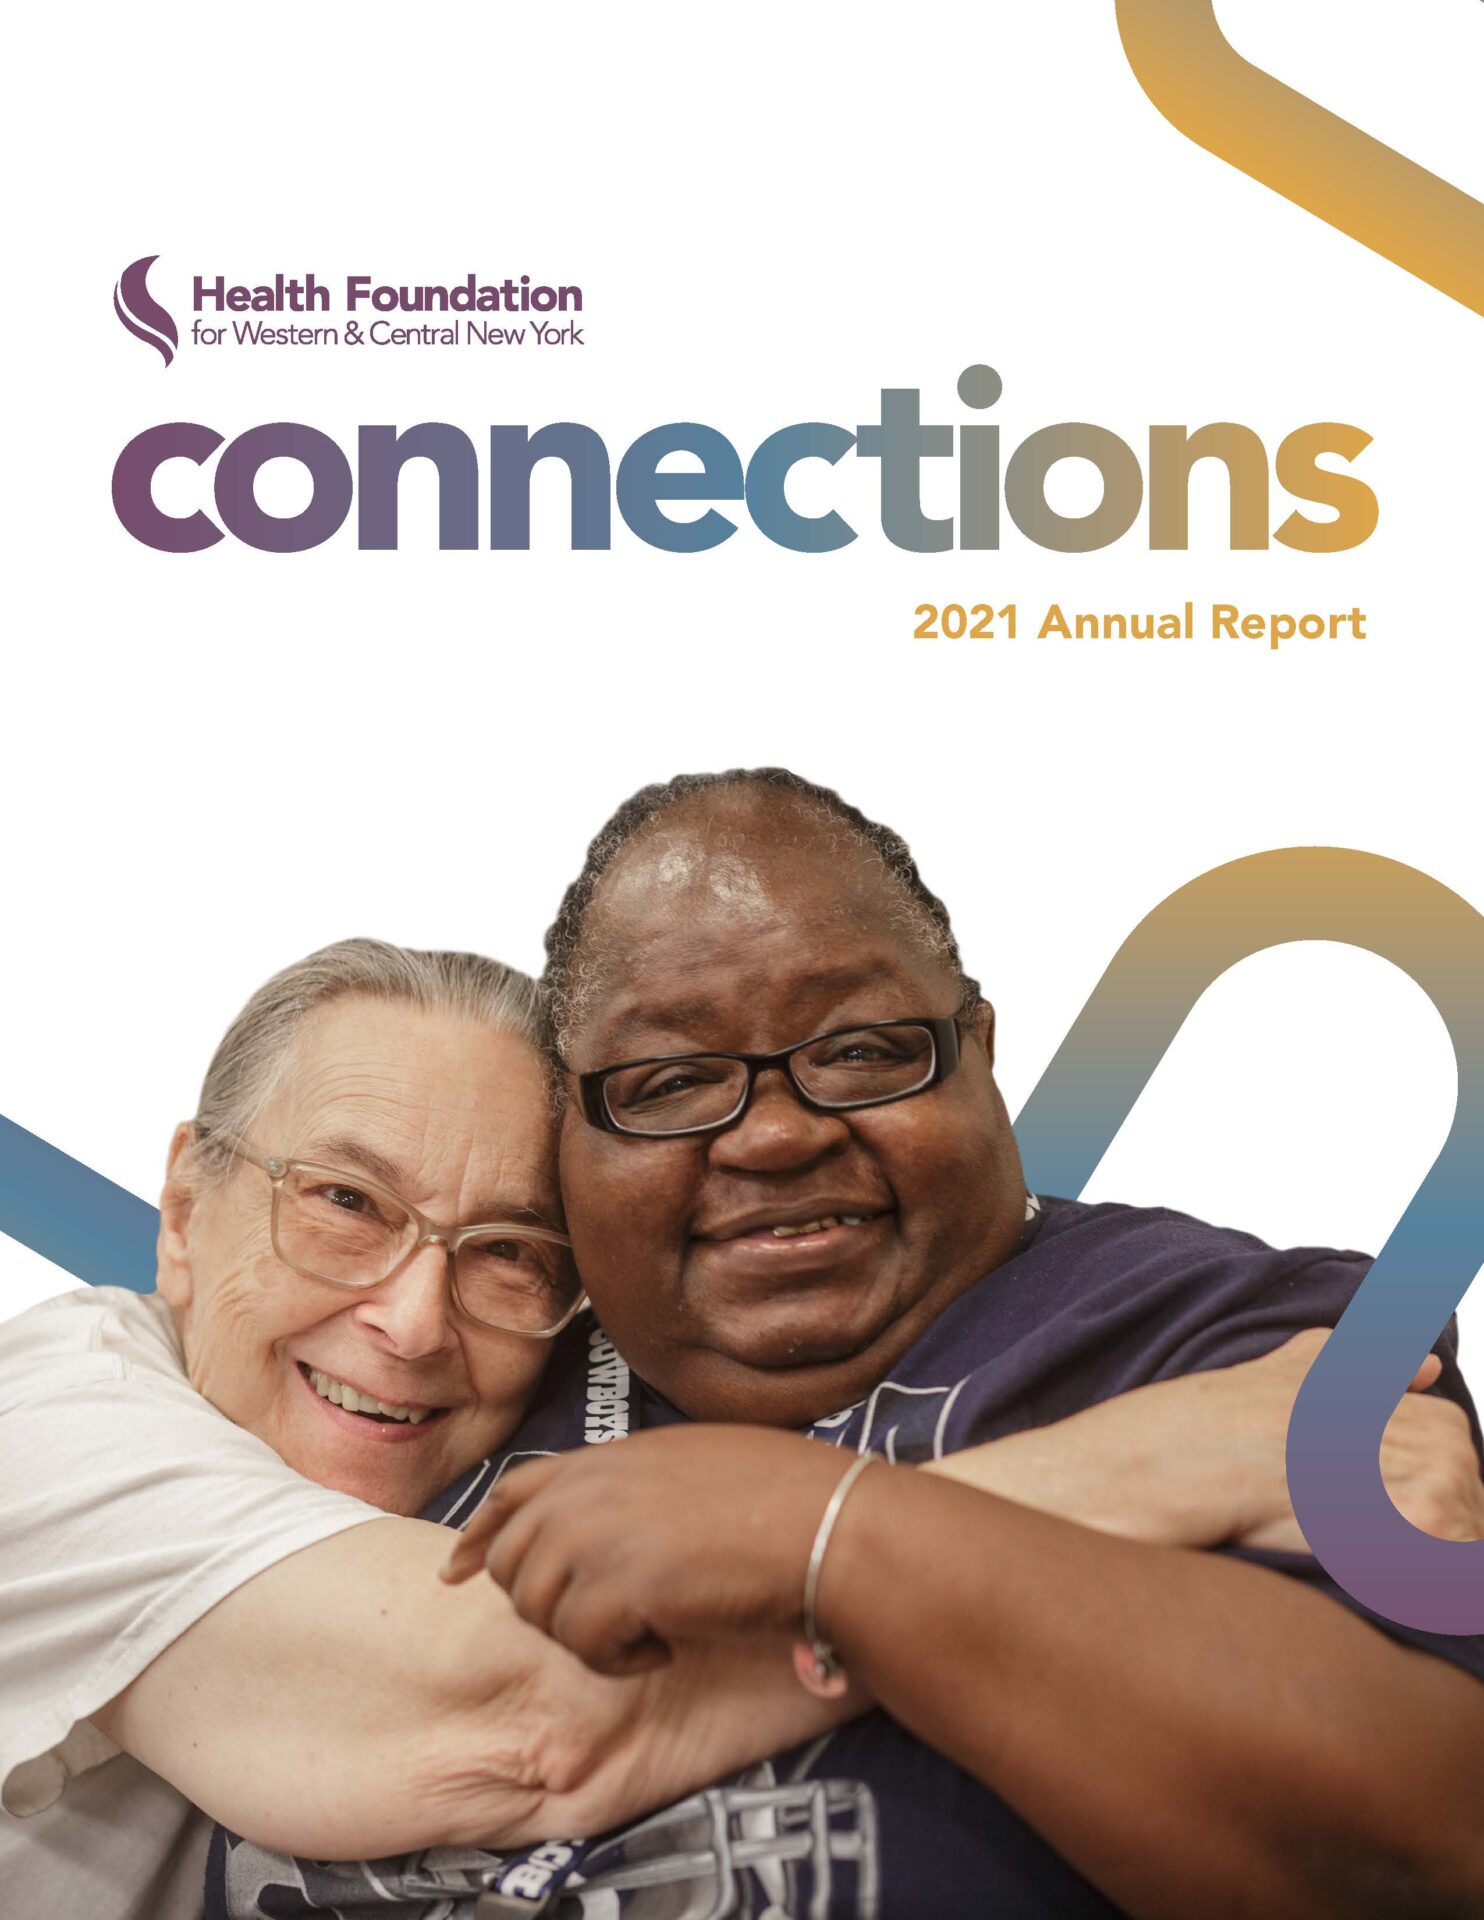 Health Foundation's annual report 2021 cover